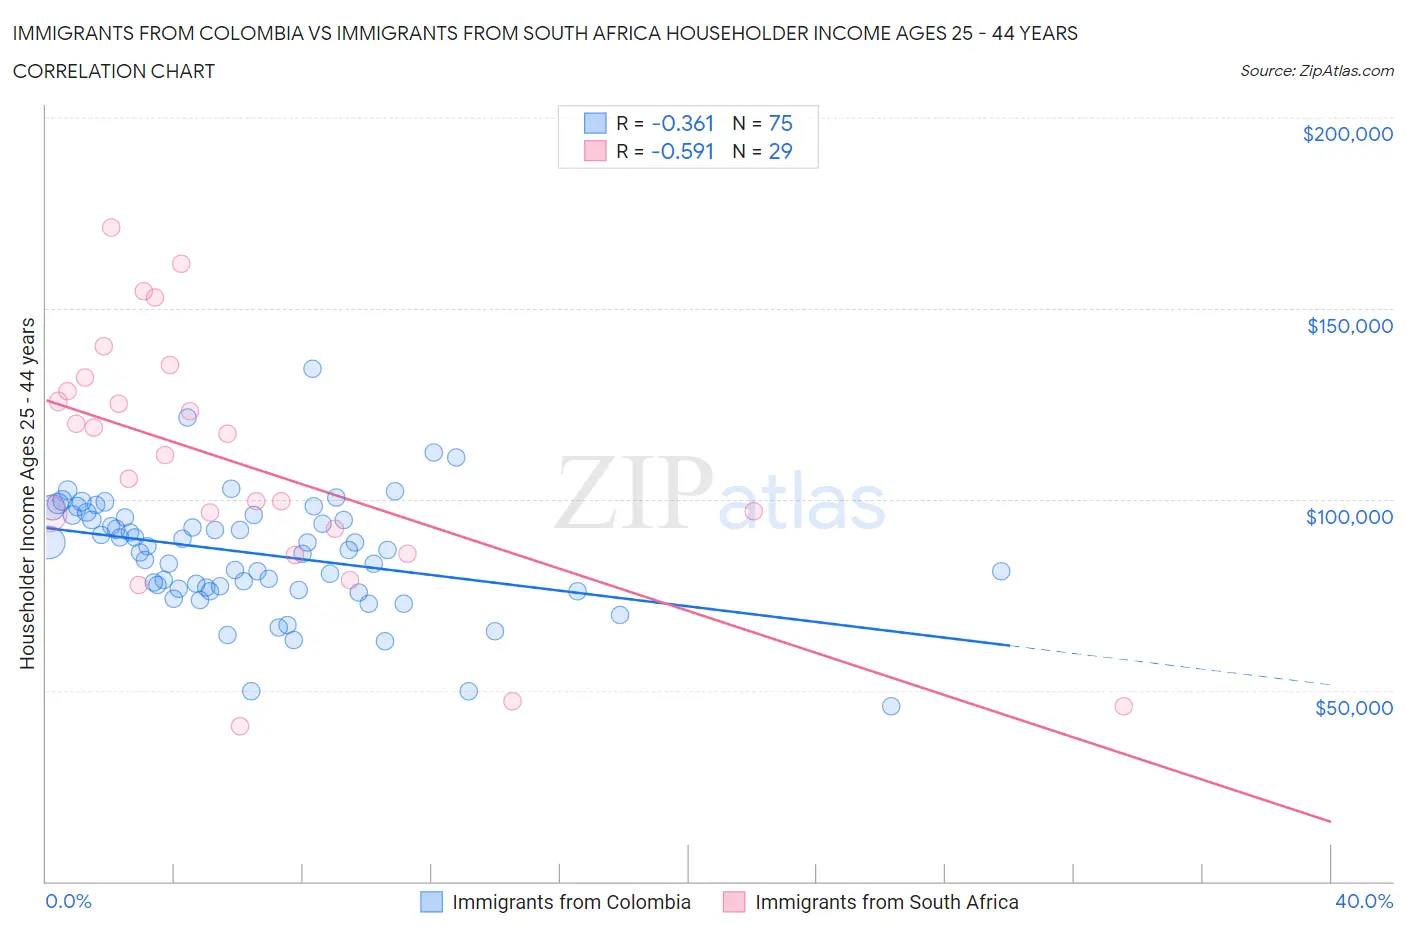 Immigrants from Colombia vs Immigrants from South Africa Householder Income Ages 25 - 44 years